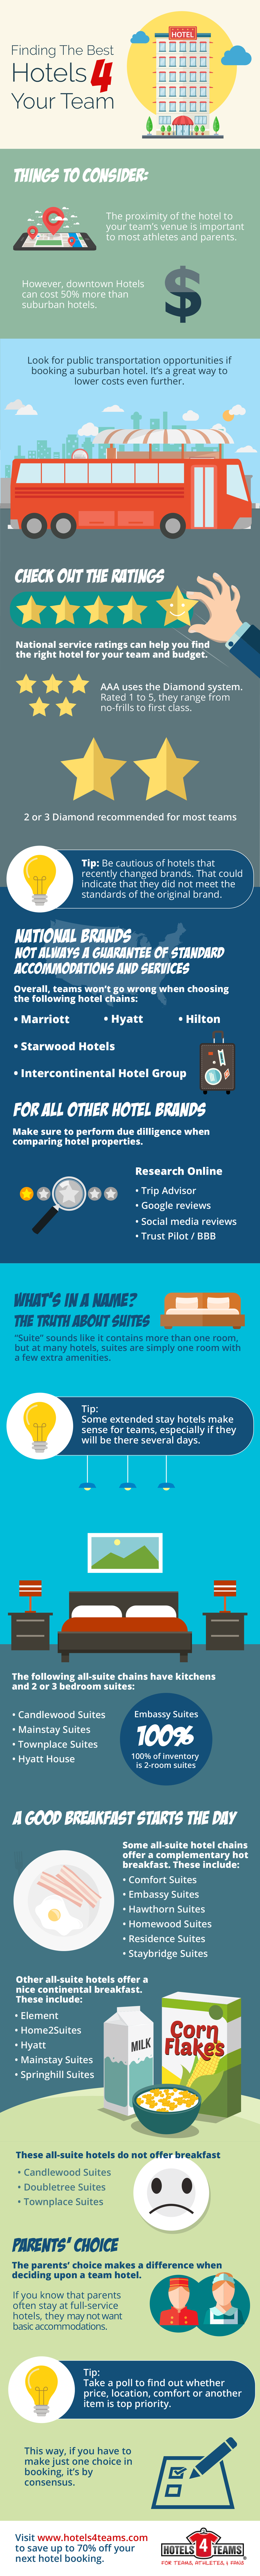 Finding the Best Hotels for Your Team